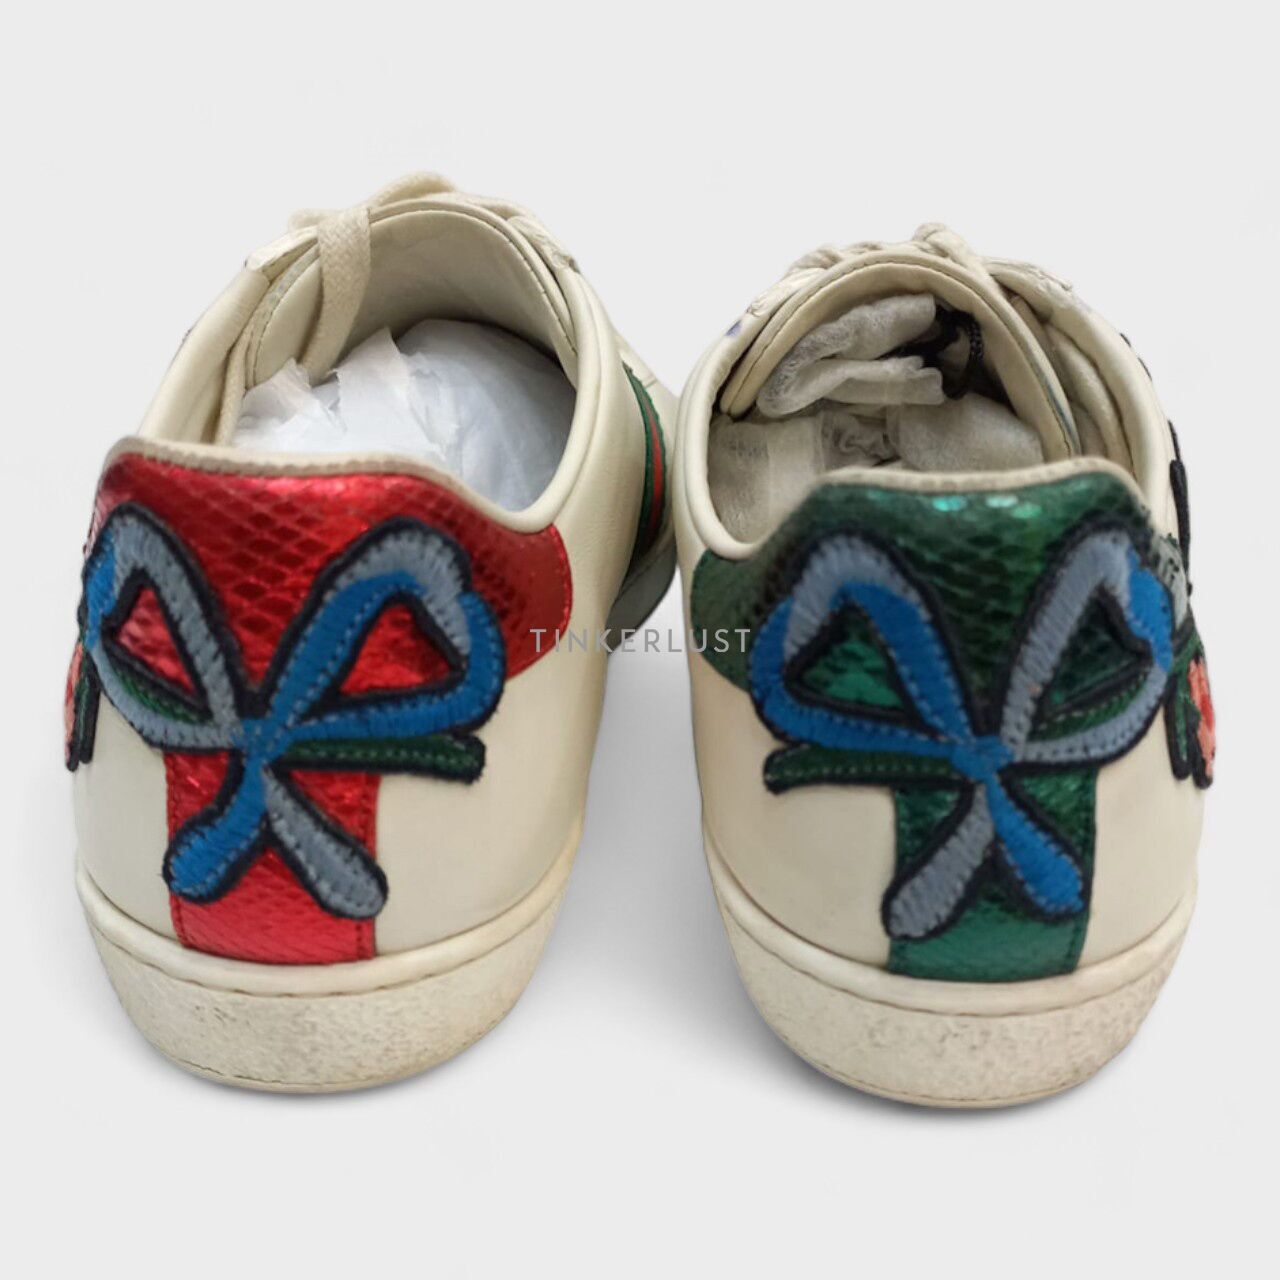 Gucci Ace Web Floral Embroidered White Leather Sneakers 